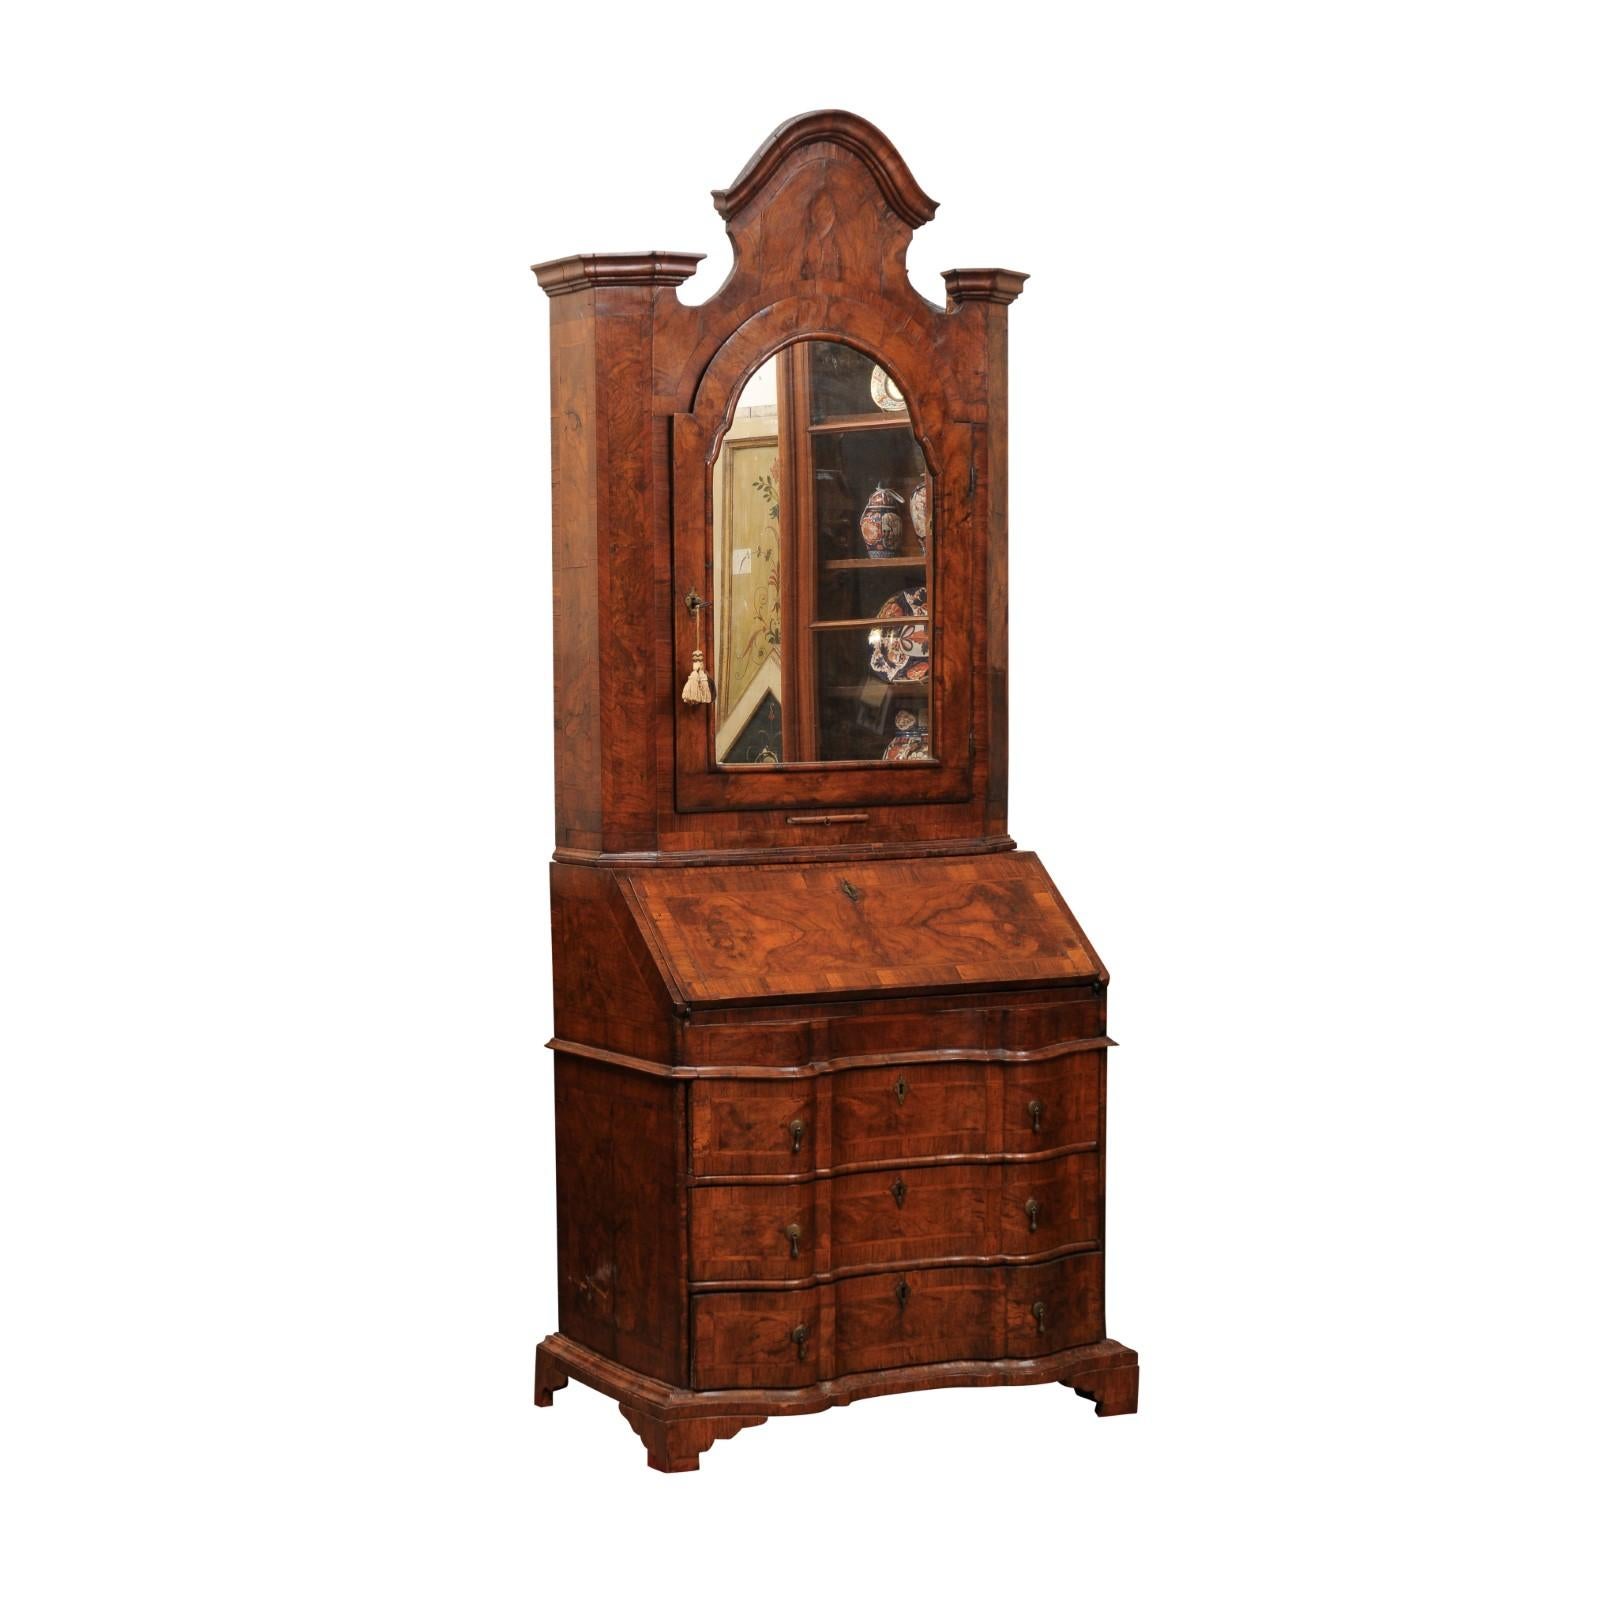 Early 18th Century Italian Baroque Figured Walnut Secretary with Architectural Pediment, Arched Mirror Cabinet Door